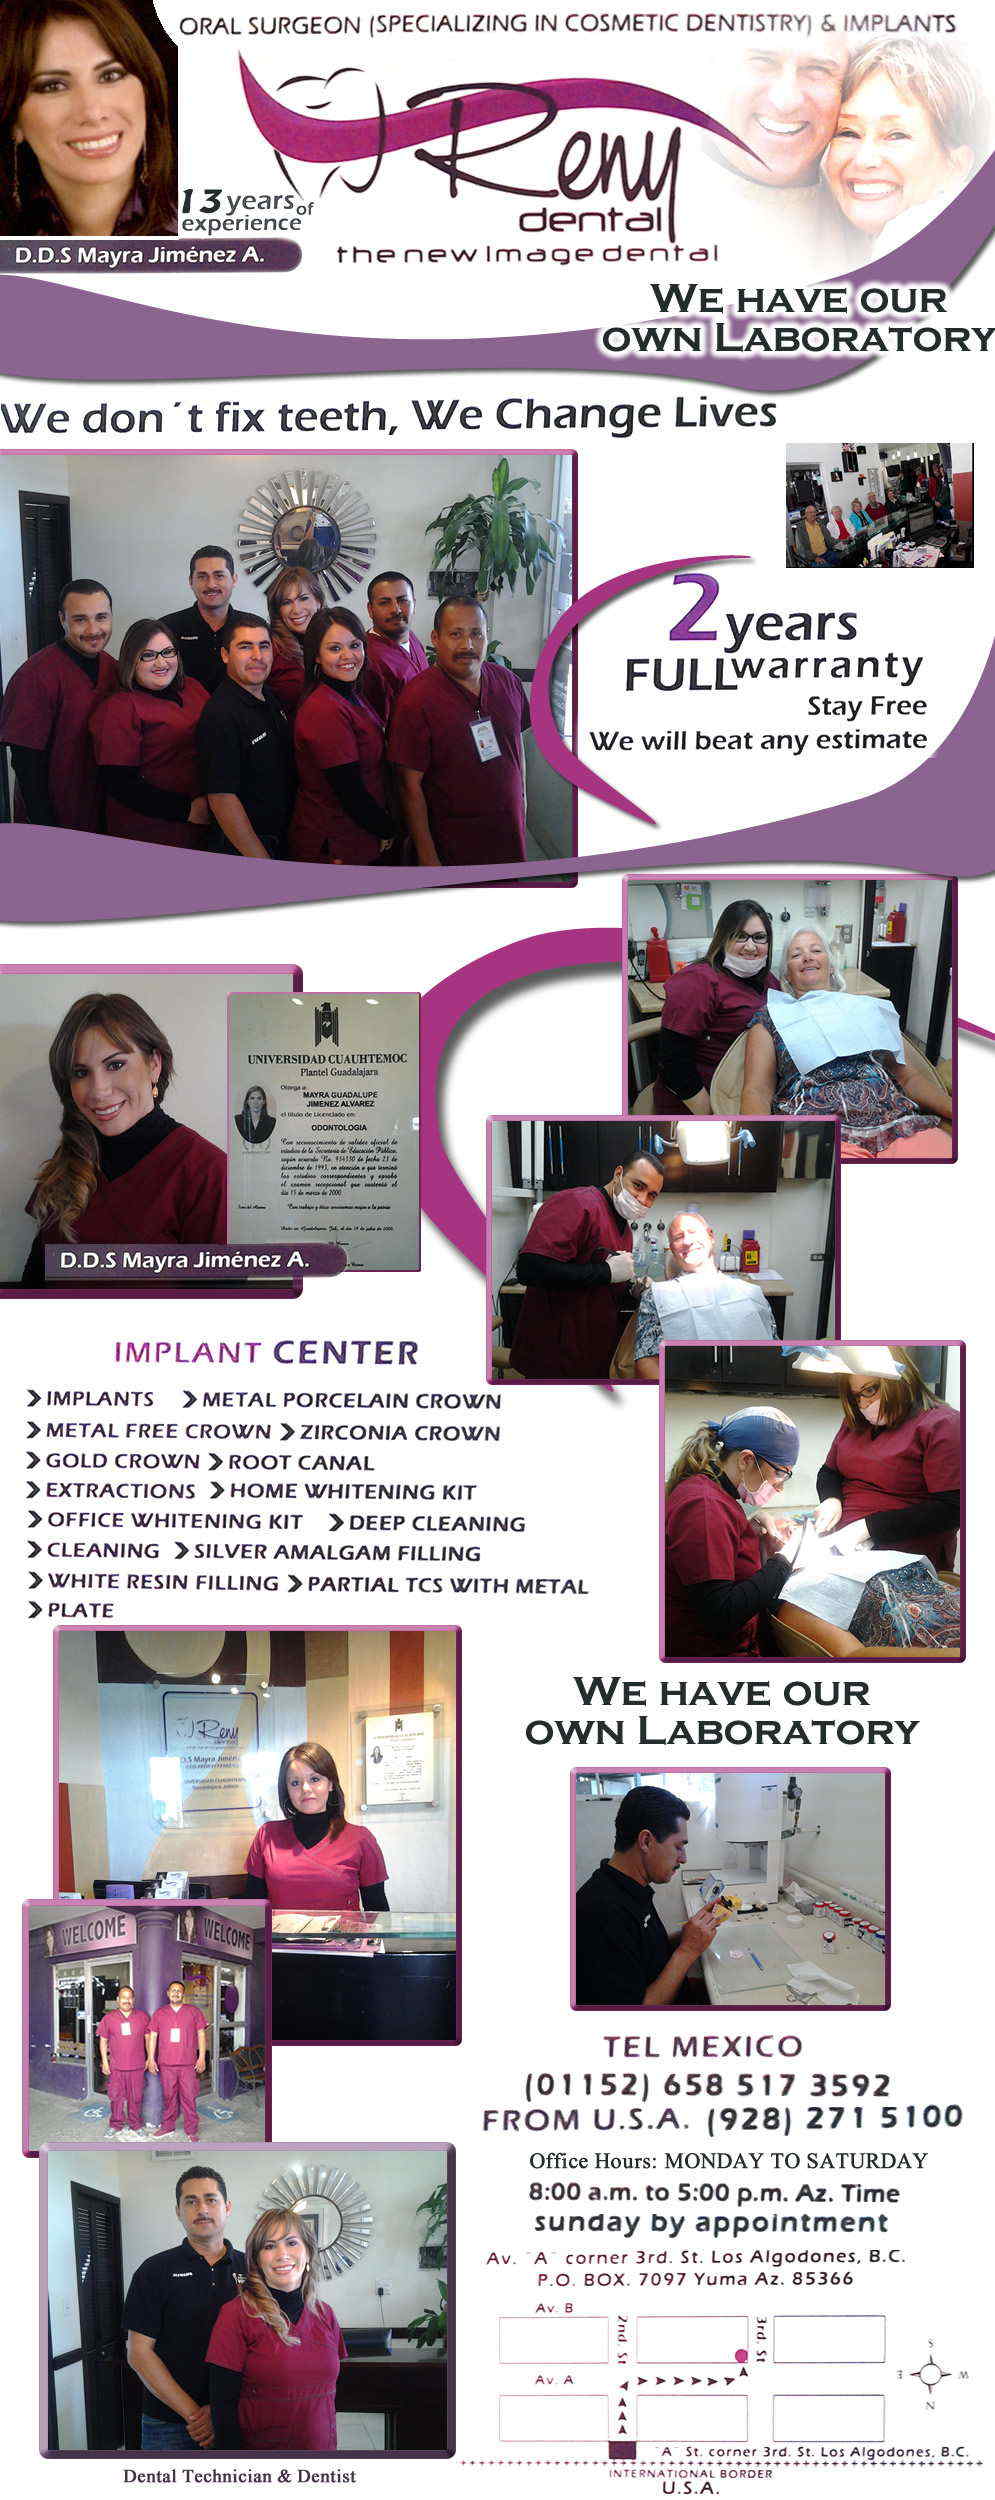 Reny Dental DDS. Mayra Jimenez A. in Algodones  in Algodones  ORAL SURGEON (SPECIALIZING IN COSMETIC DENTISTRY) & IMPLANTS. WE HAVE OUR OWN LABORATORY.     Bridges

X-Rays

Porcelain Veneers

Metal Crowns

Dental Bonding

Deep Cleaning

Denture Repair	Traditional Acrylic Dentures

Prescriptions

Root Canals

Metal Bridges

White Fillings

Root Canal Therapy

Relines (Hard or Soft)	General Oral Surgeries

Porcelain Crowns

Flexible Partials

Composite Posts

Teeth Whitening

Extractions

Flexible Parials	Implants

Porcelain Veneers

Wisdom Tooth Extractions

Metal Posts

Traditional Cleaning

Metal/Acrylic Partials


 Immediate Upper and Lower Dentures (Alveoplasty) maps           